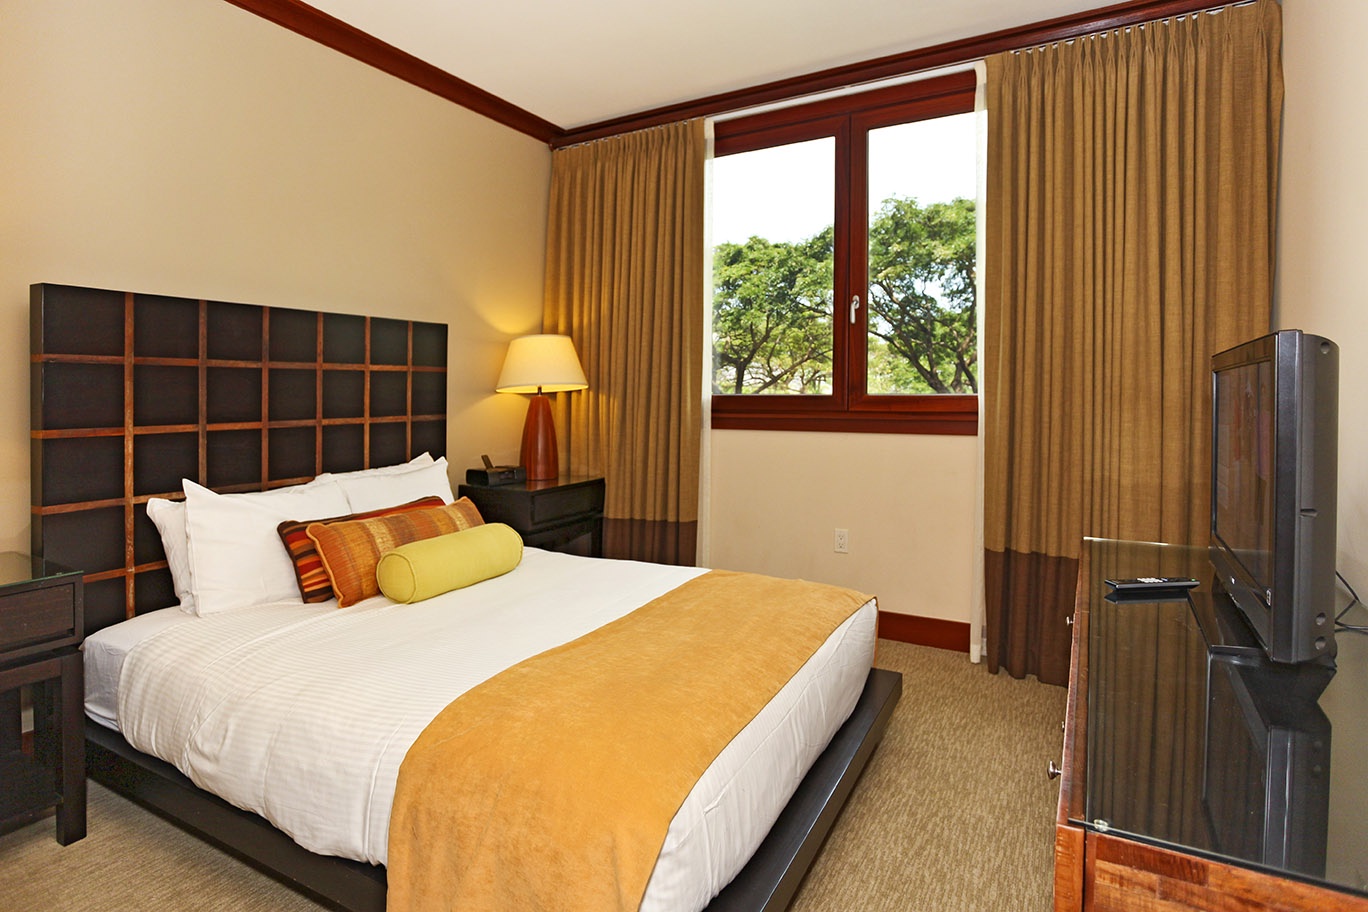 Kapolei Vacation Rentals, Ko Olina Beach Villas B204 - The second guest bedroom with a queen bed and views.